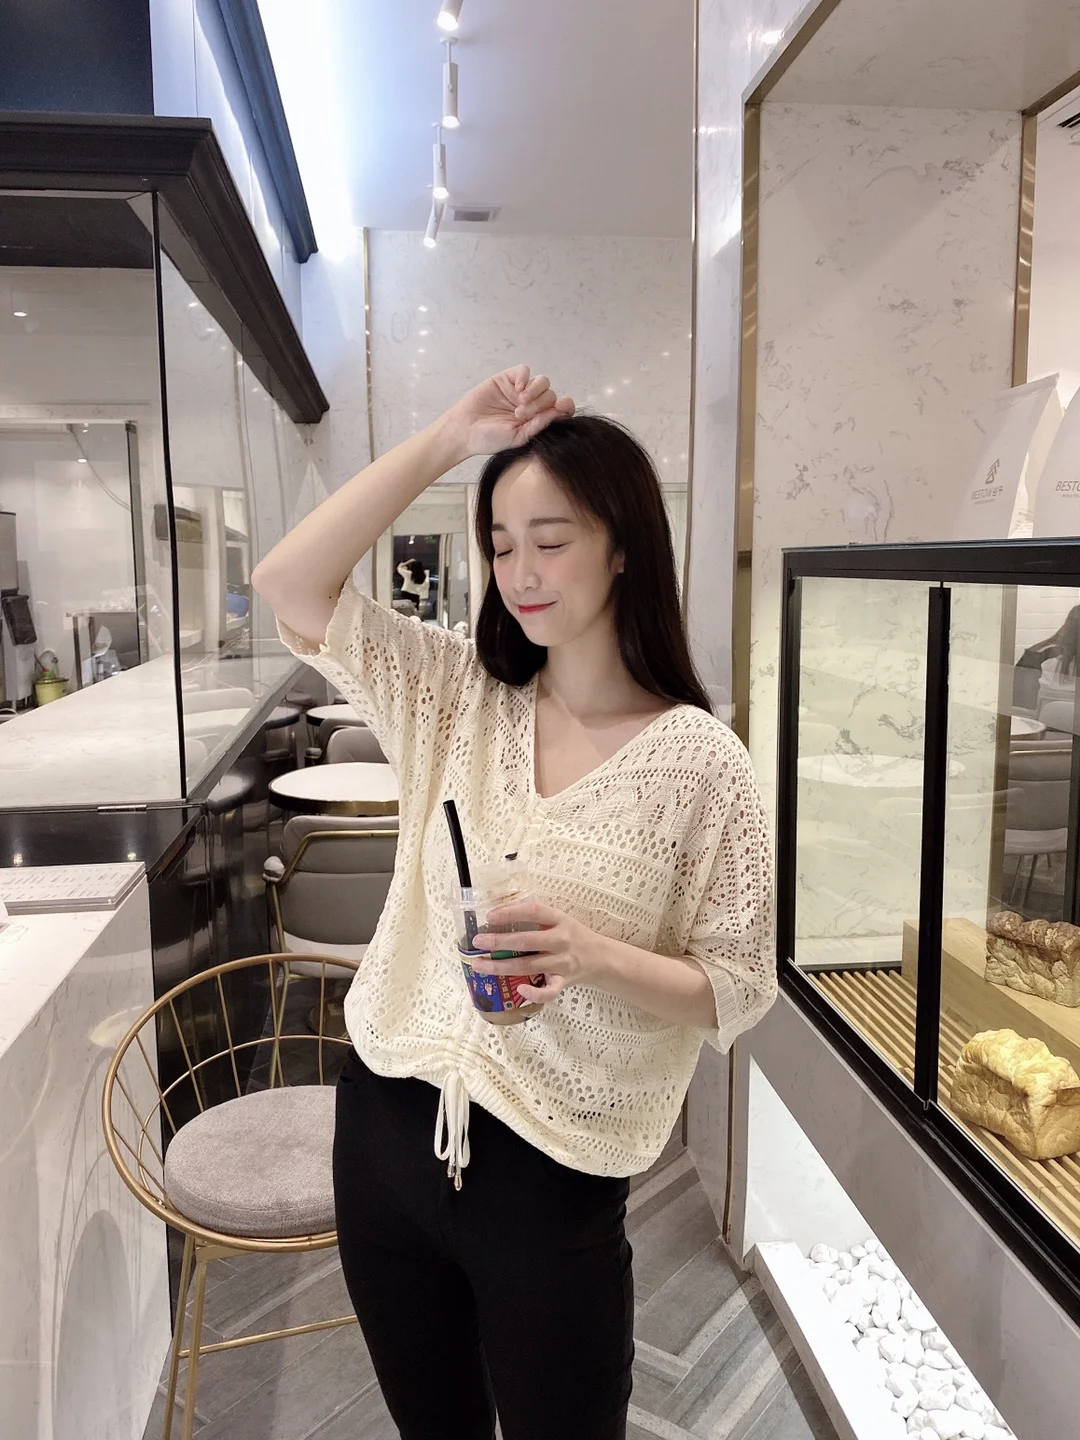 New High-quality Soft V-neck Hollow Cut Solid Color Spring Summer Slim Half Sleeve Sweater Thin Pullover Loose Blouse Women Tops